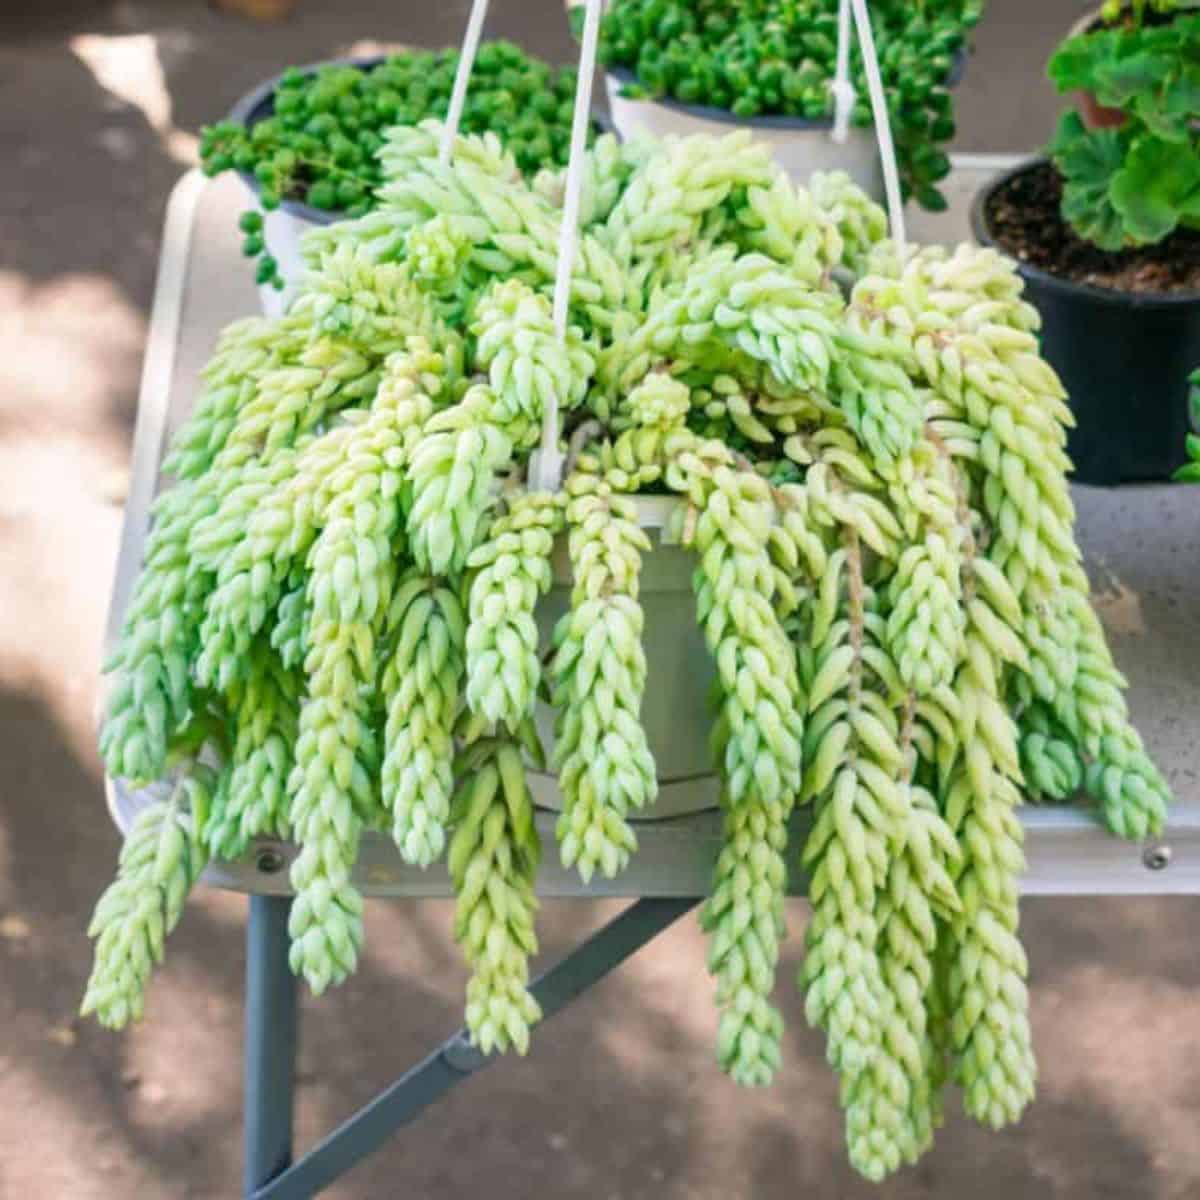 Donkey's tail in a hanging pot.